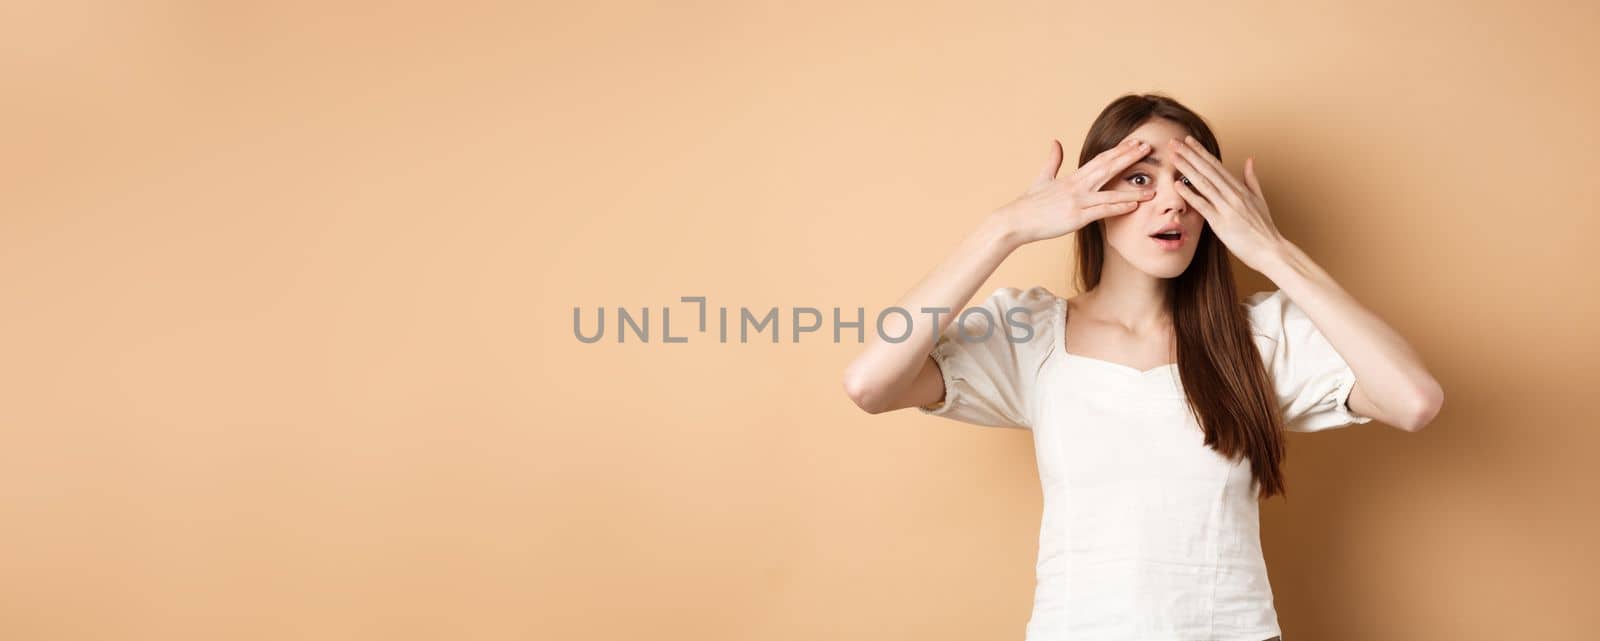 Curious girl peeking through fingers at something interesting, cannot wait to see surprise, look intrigued at camera, beige background.